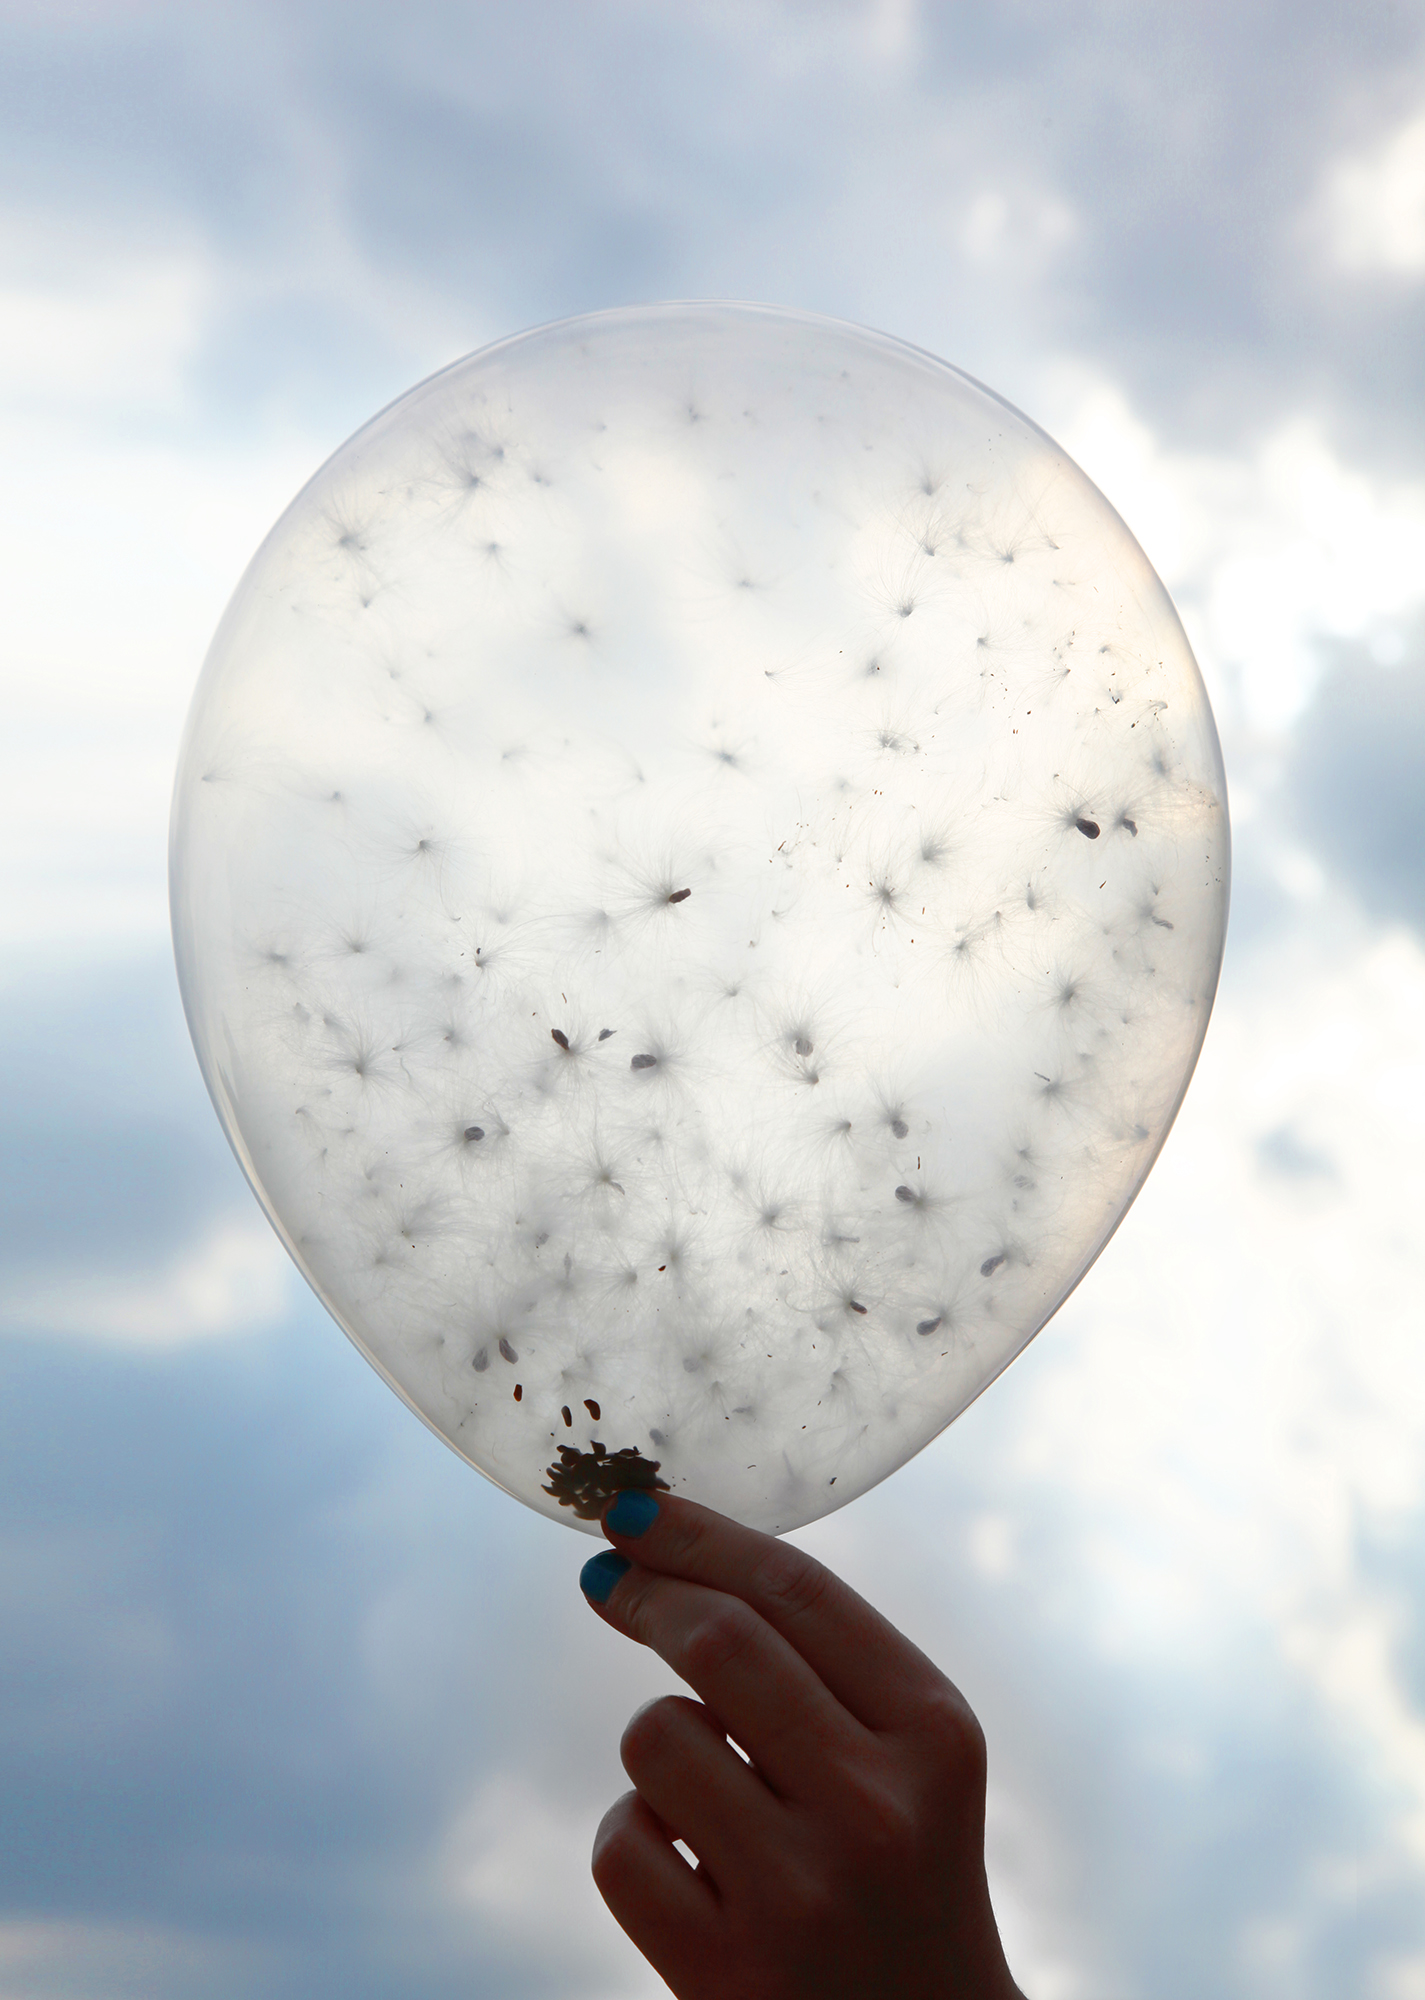 Jenny Kendler, Milkweed Dispersal Balloons (performance), 2014–15. Digital print. Courtesy of the artist and the Natural Resources Defense Council.